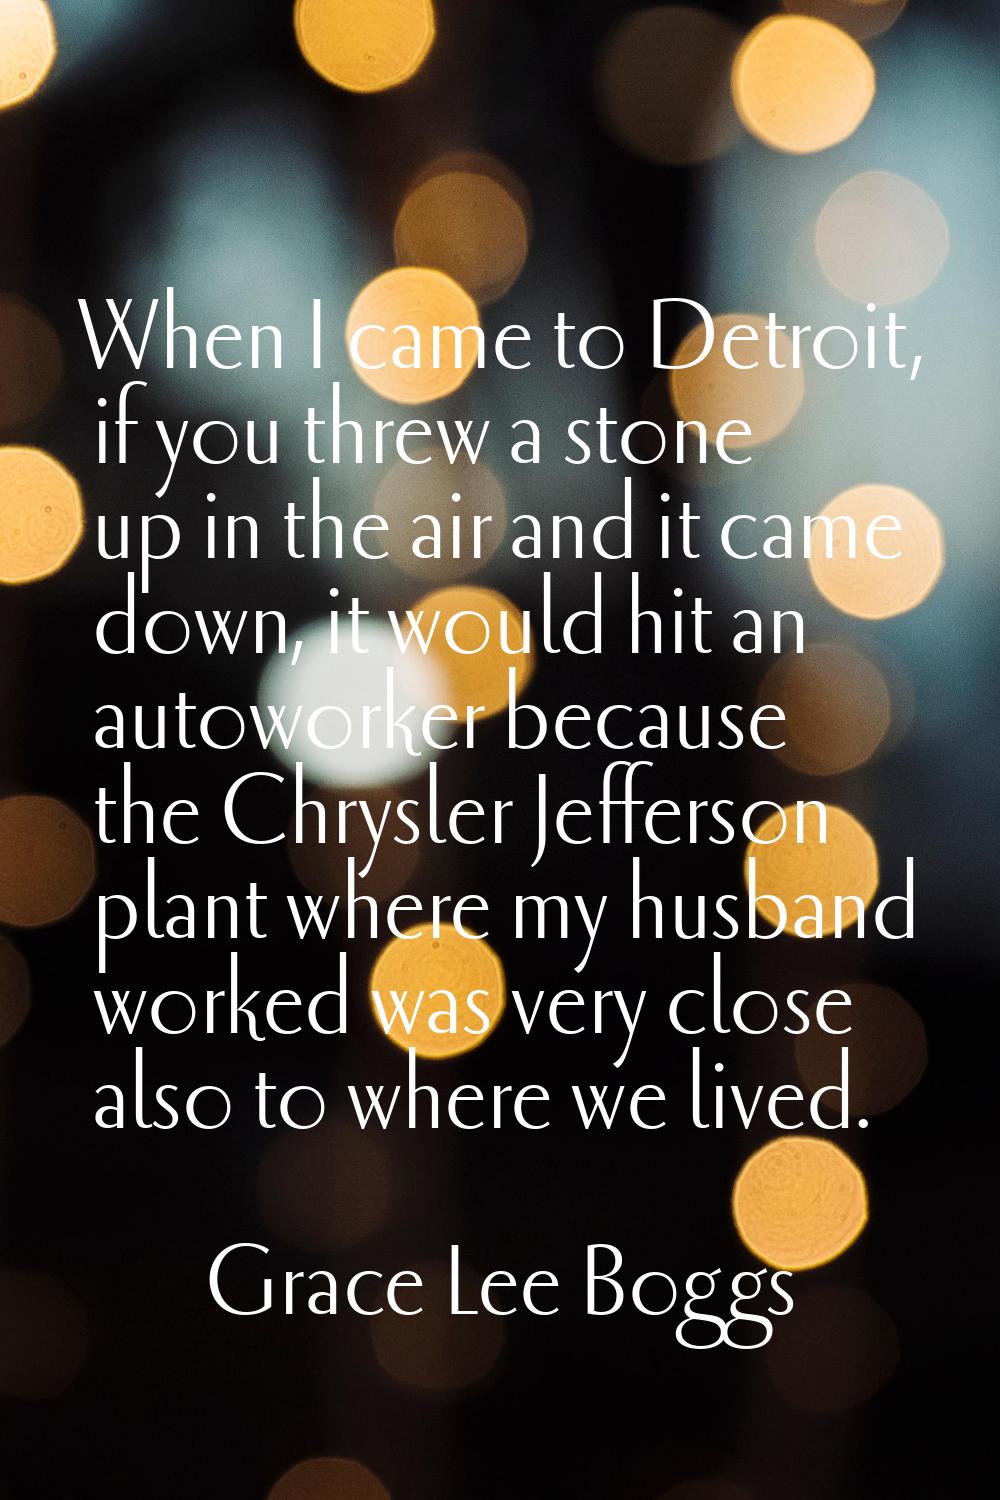 When I came to Detroit, if you threw a stone up in the air and it came down, it would hit an autowo